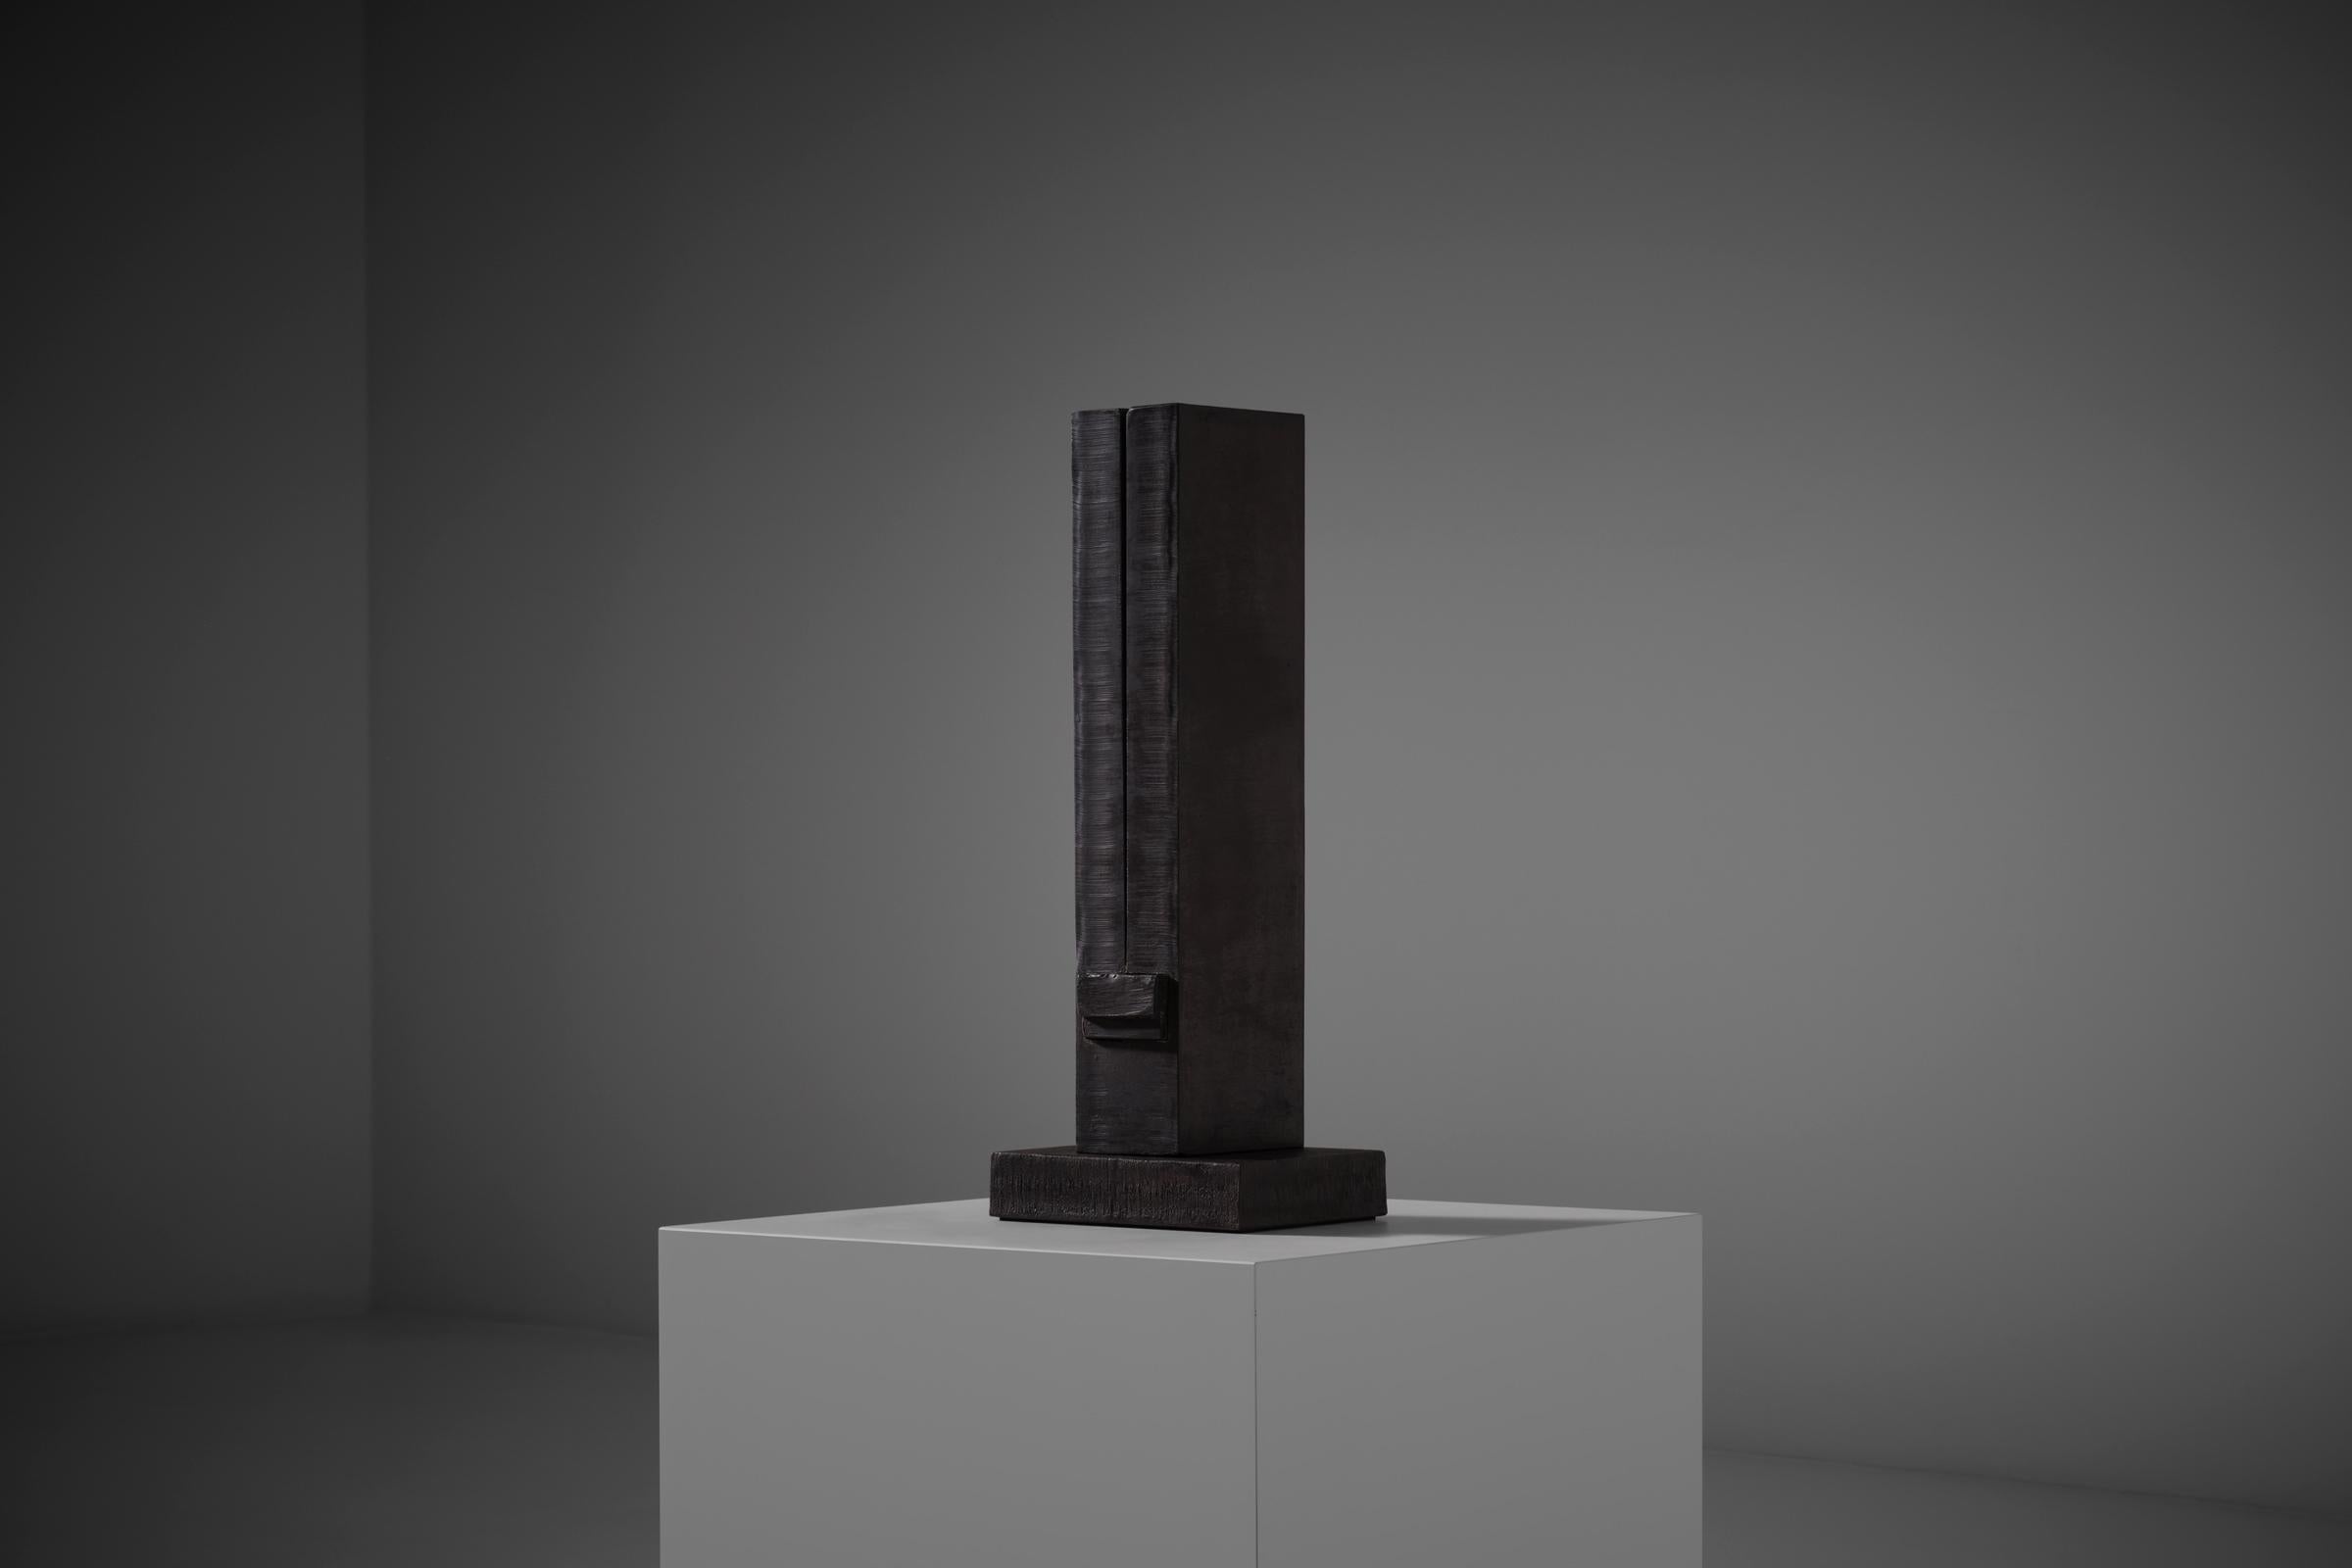 Strong and heavy raw metal sculpture by Bart Kelholt (Amsterdam 1946), The Netherlands 1980. Kelholt studied at the Gerrit Rietveld Academie in Amsterdam between 1970-1976. Very minimal yet high refined appearance showing a great artistic eye.